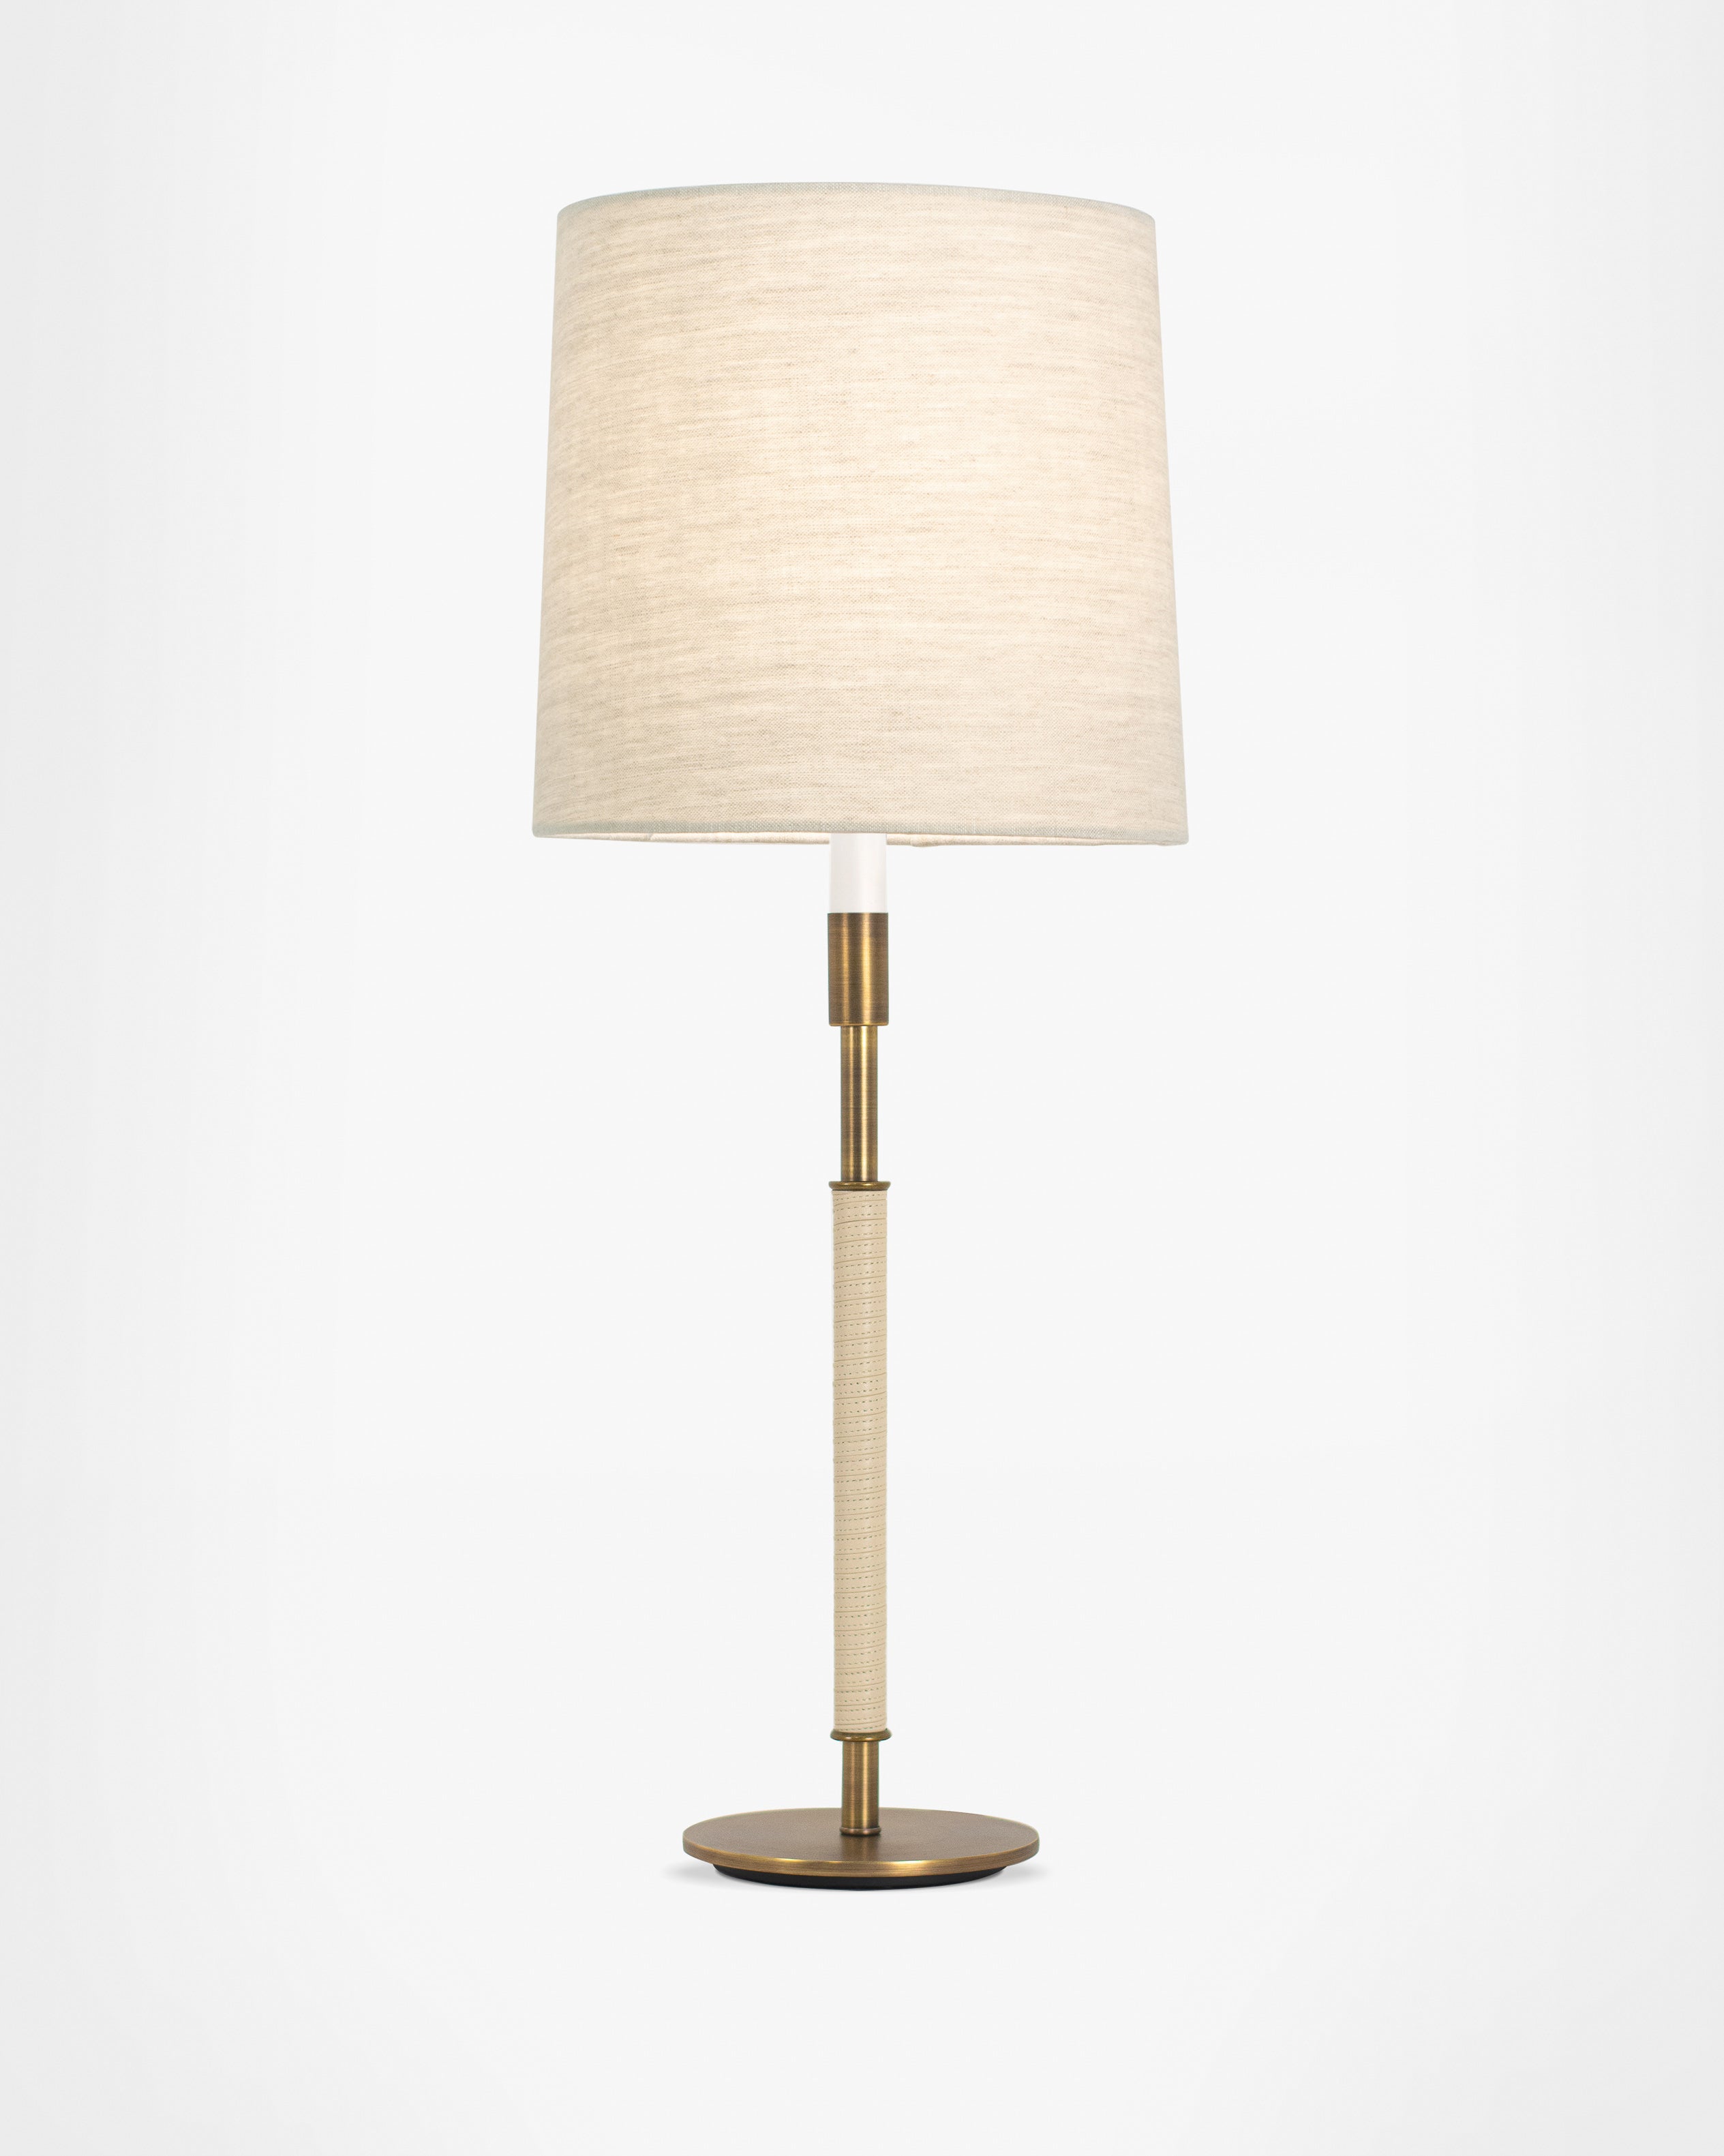 Light Antique Brass with Cream Leather and Natural Linen Shade